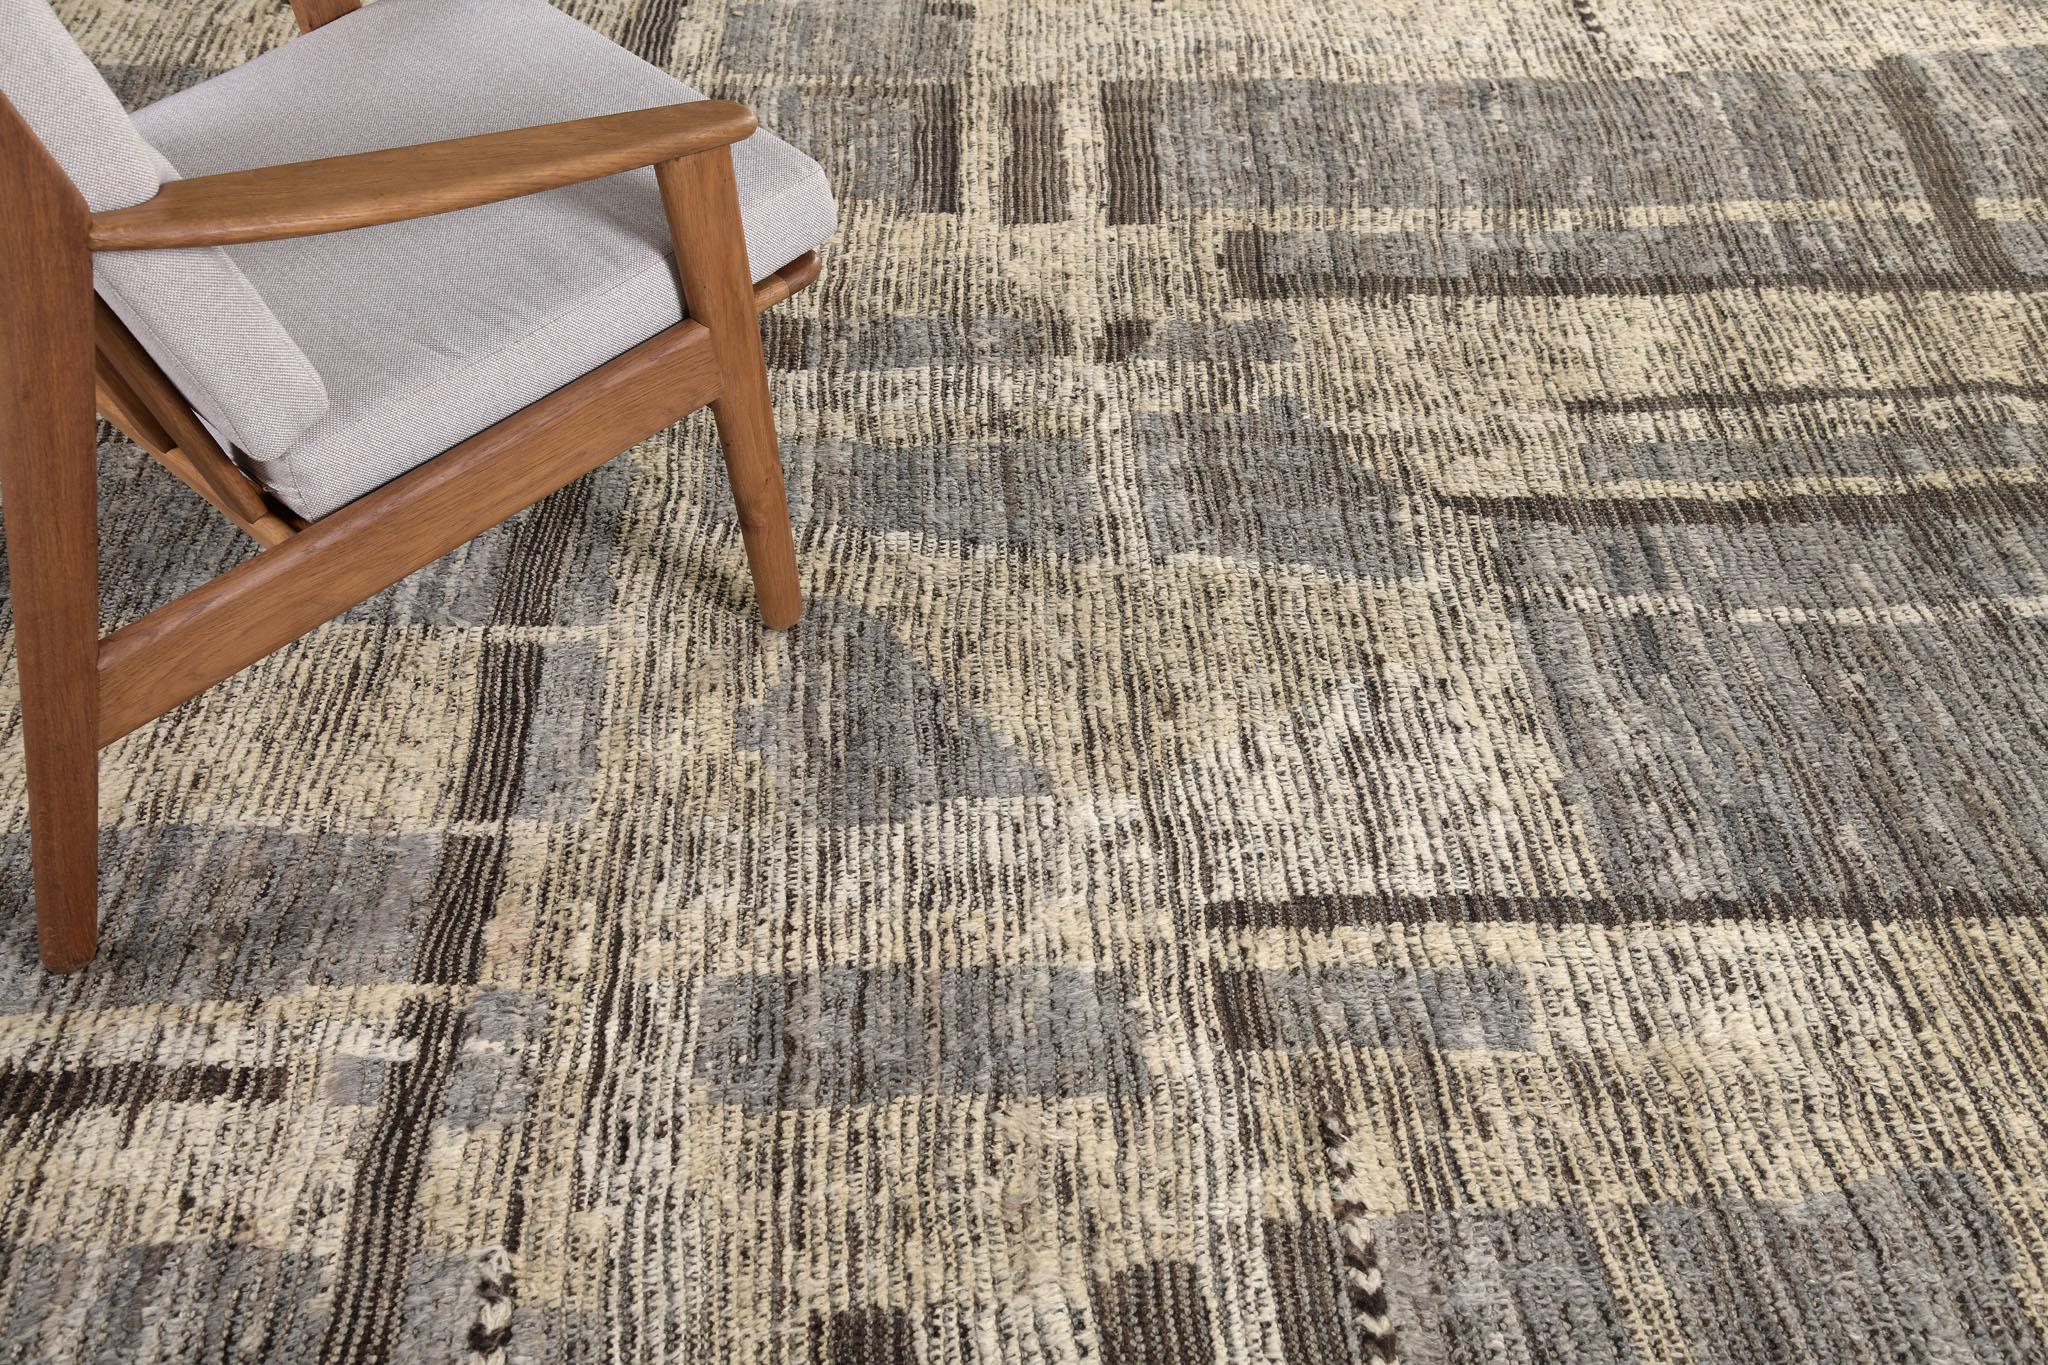 Aziza is a warm and lustrous wool rug with a unique play of colors and irregular shapes. This pile weave has natural-toned embossed textures and unique tassel detailing which makes this piece highly sought after. Mehraban's Atlas collection is noted